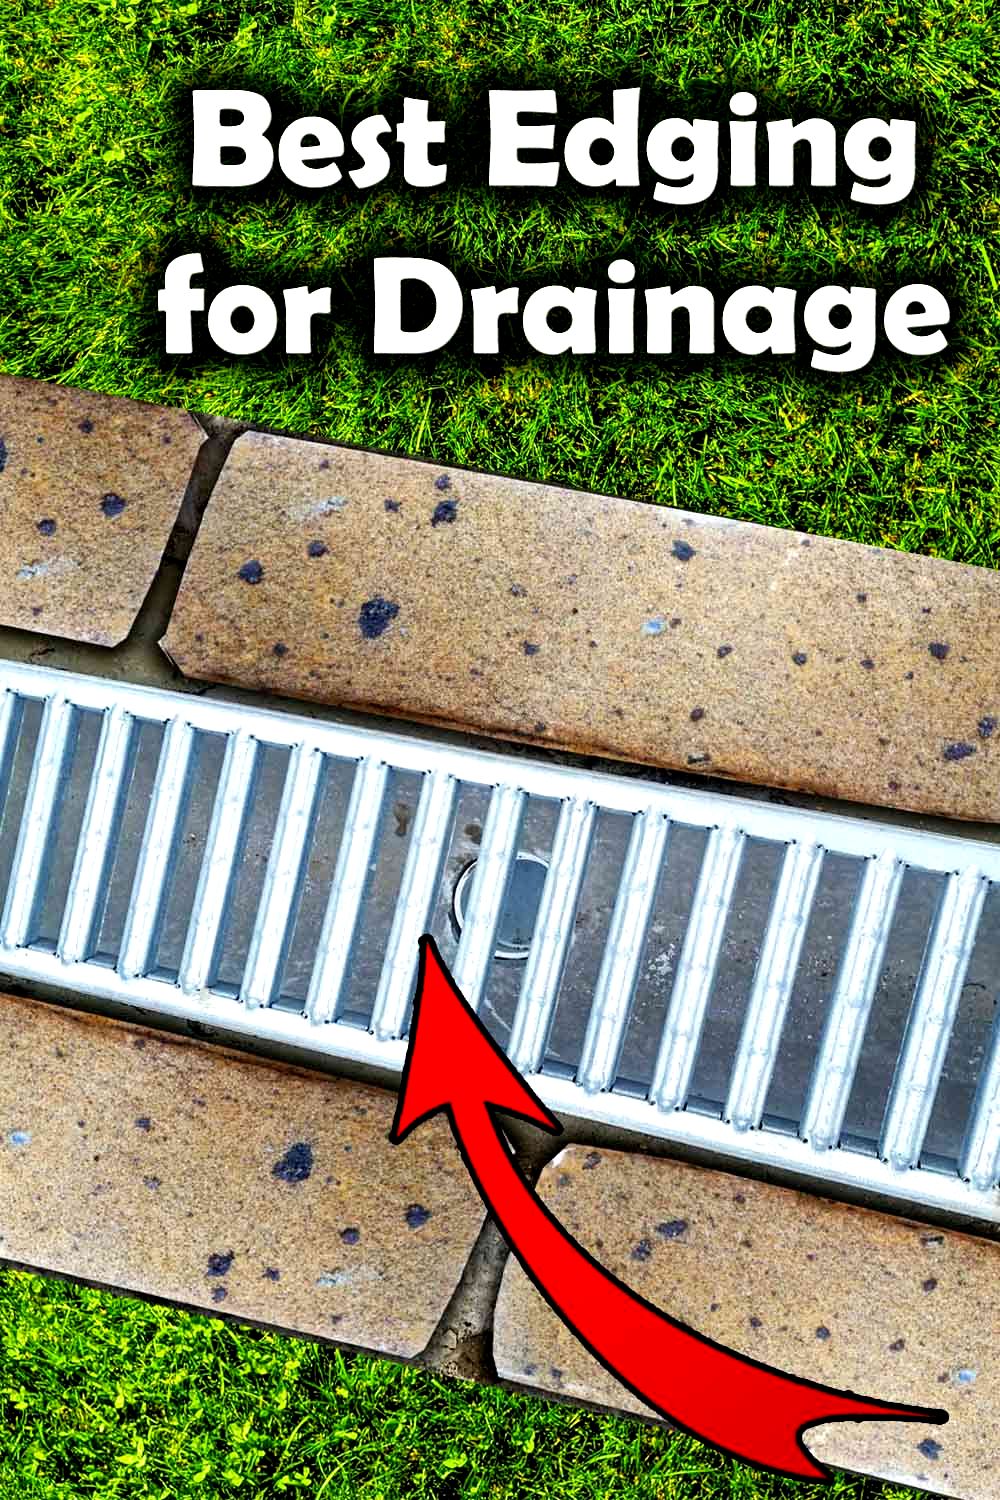 Edging for drainage